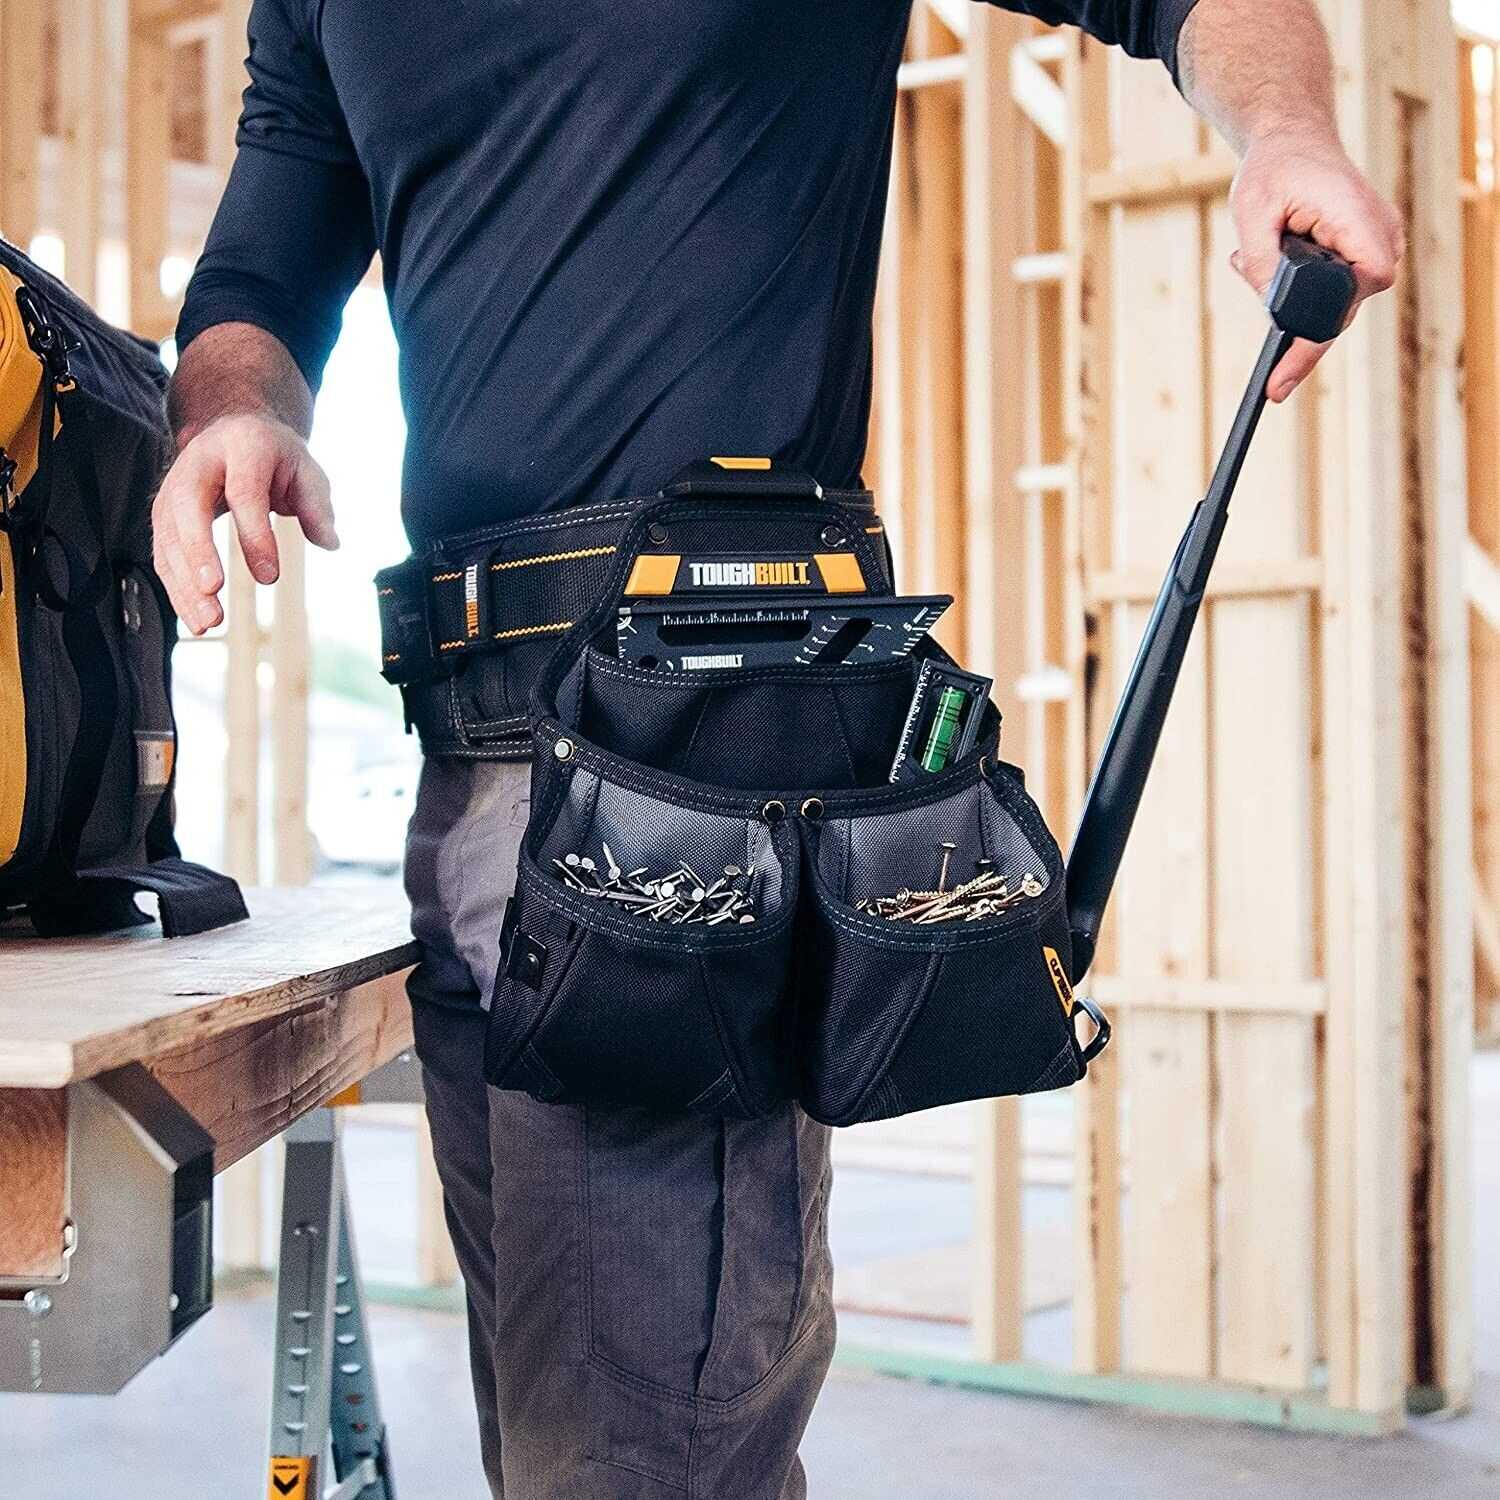 How Do You Remove Stuff From Tool Belt